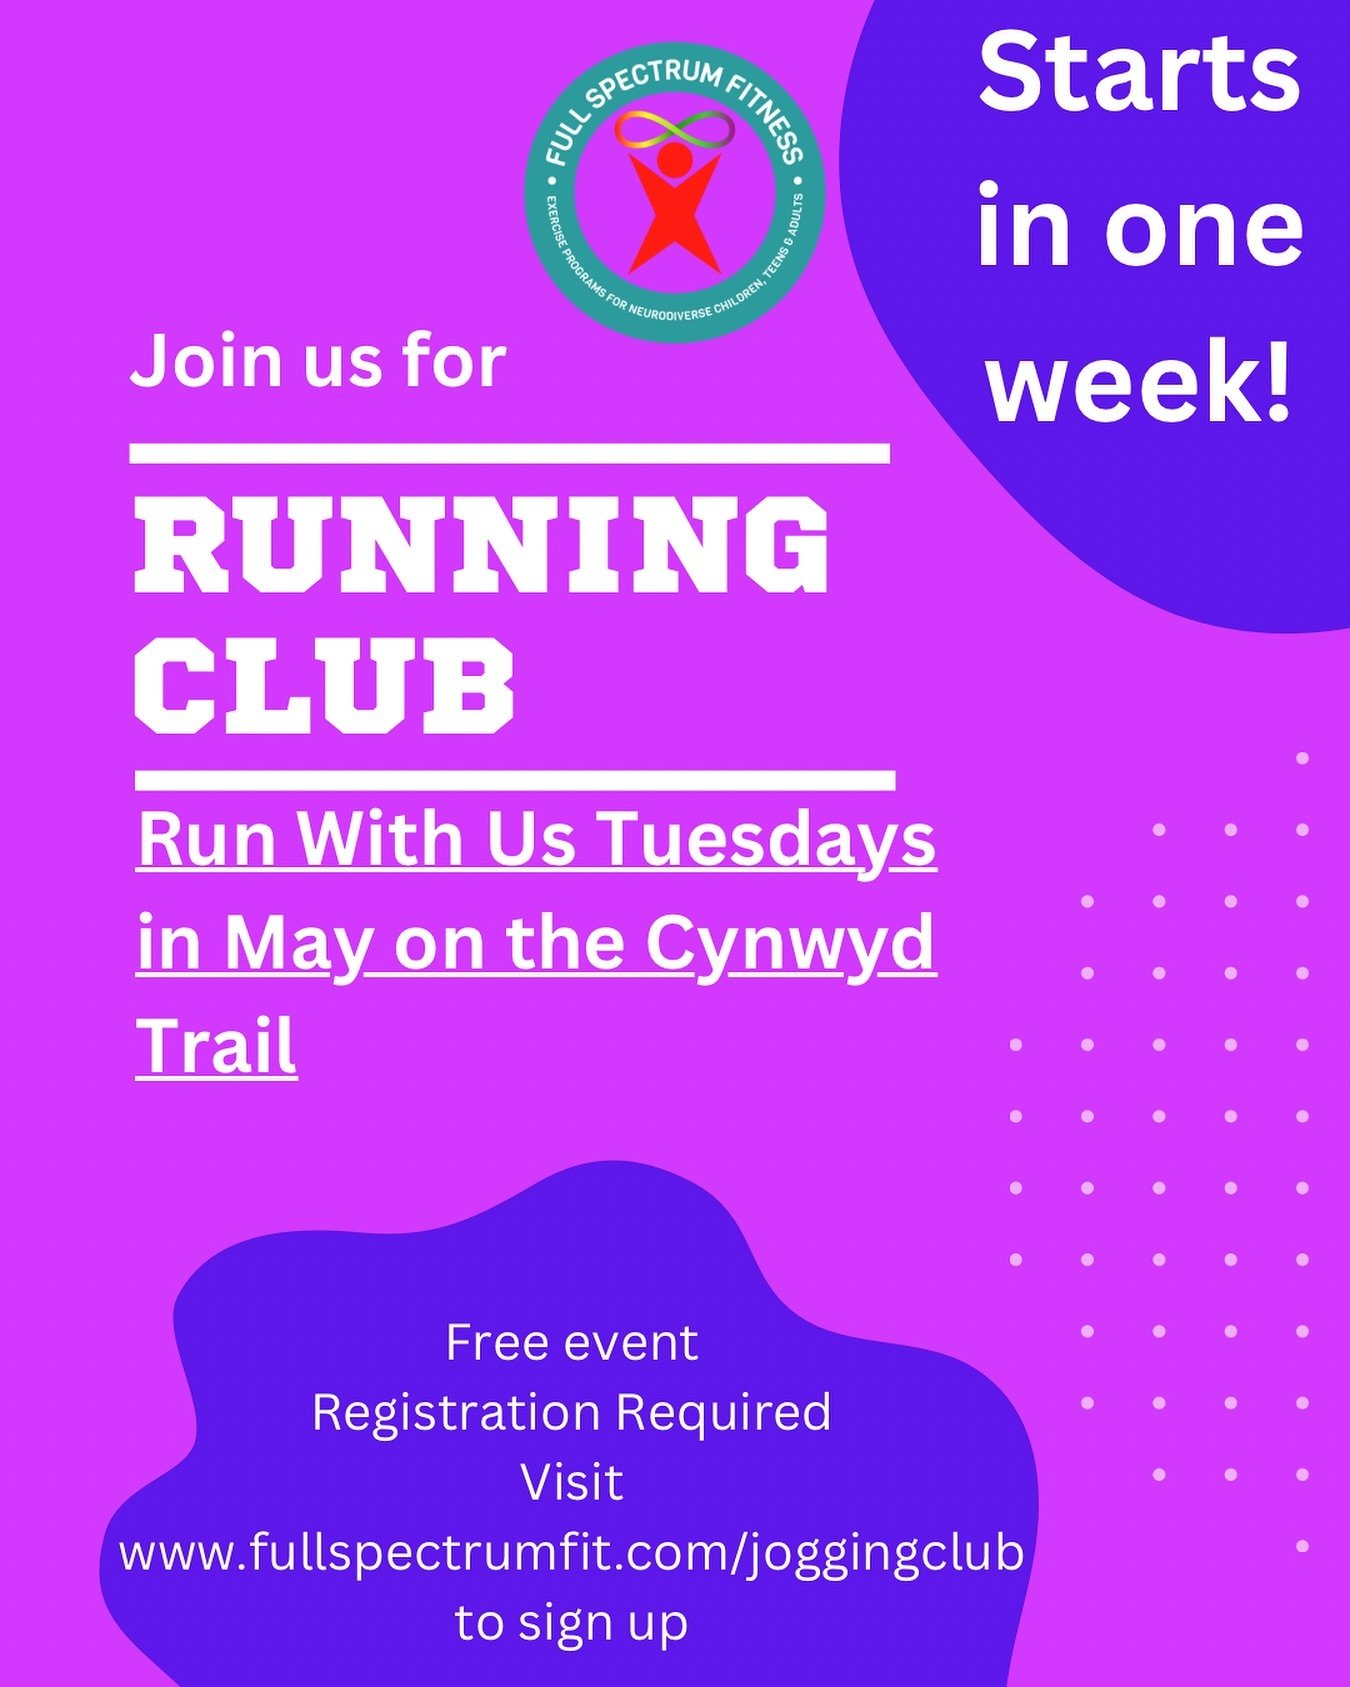 Join us for jogging club. Starts in one week!
#jogging #running #walking #supportedexercise #neurodiversity